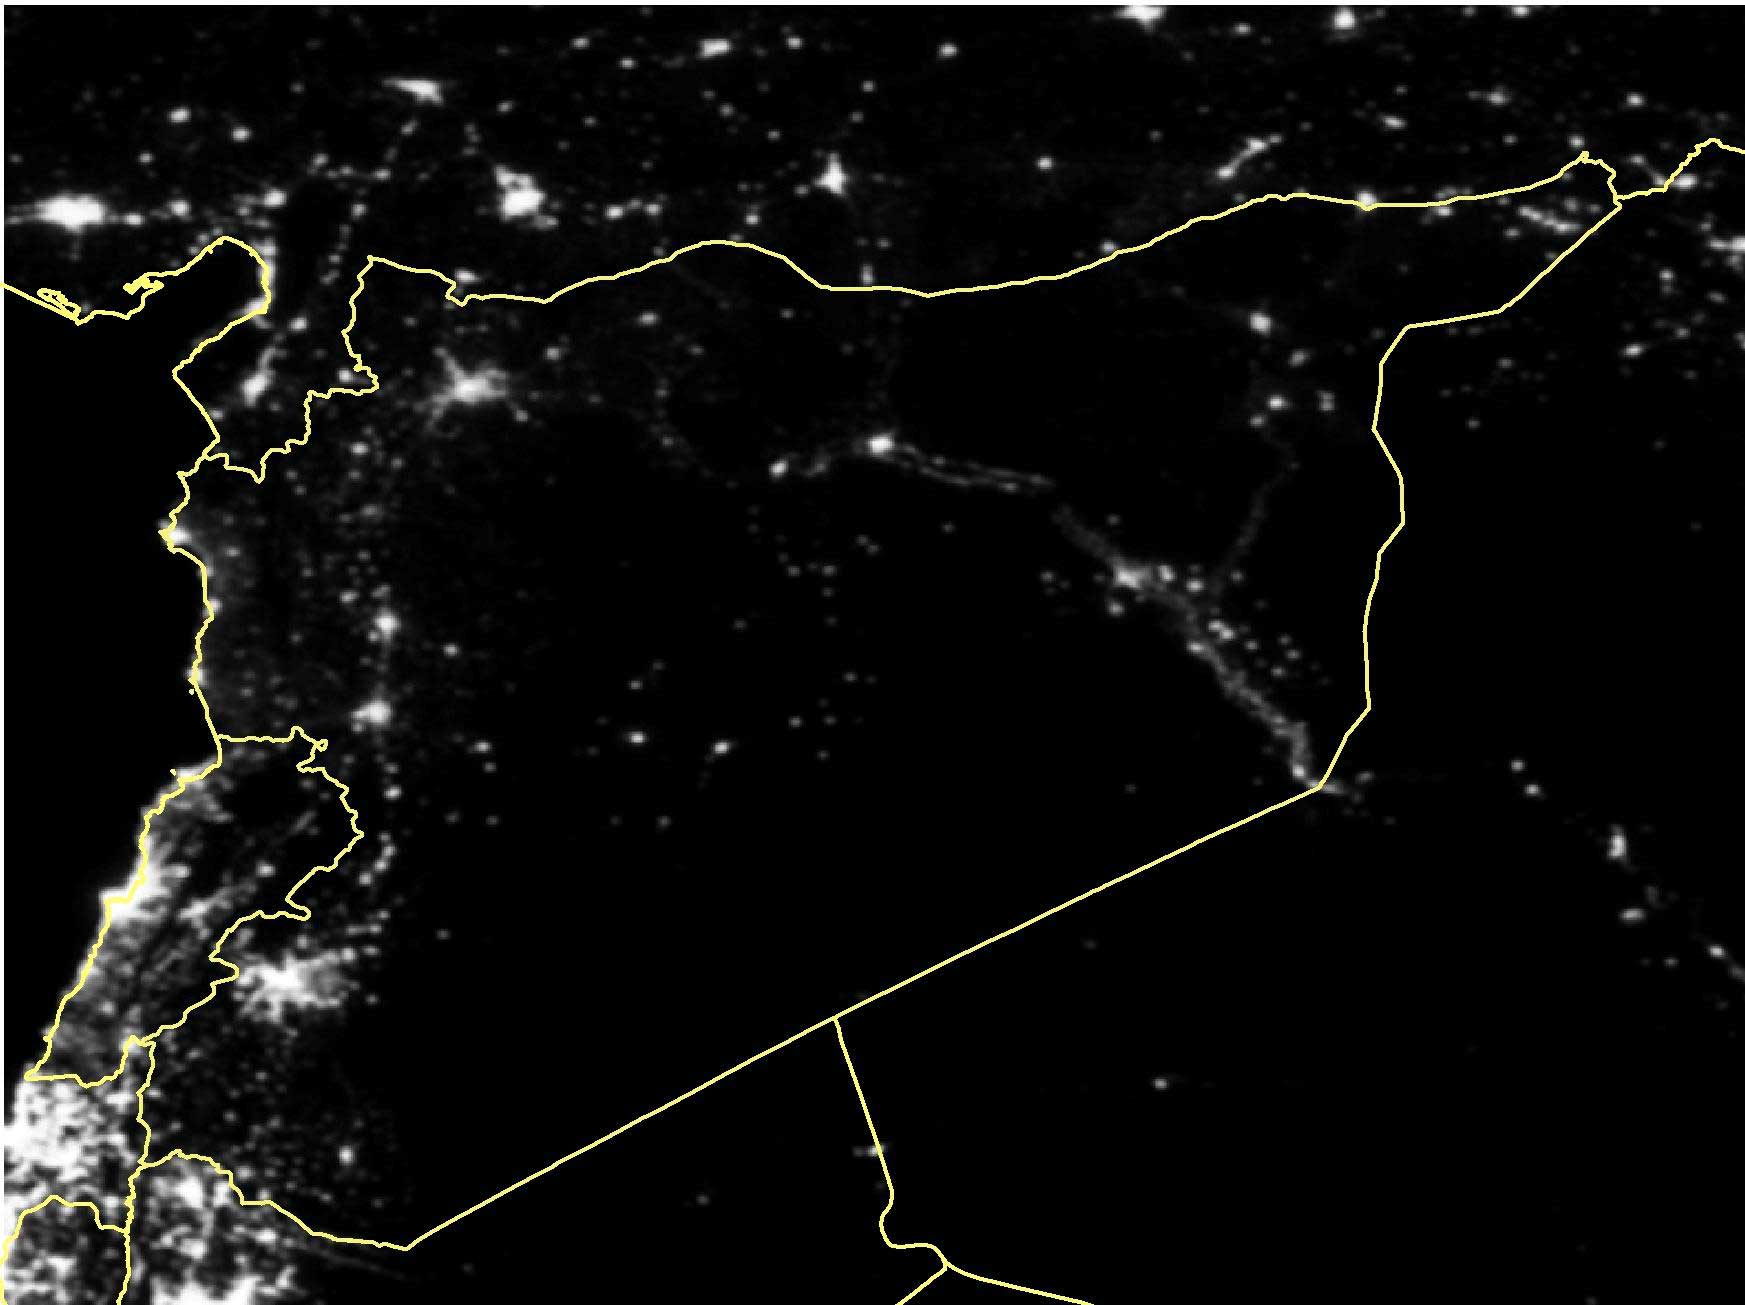 Satellite imagery of Syria in March 2012.